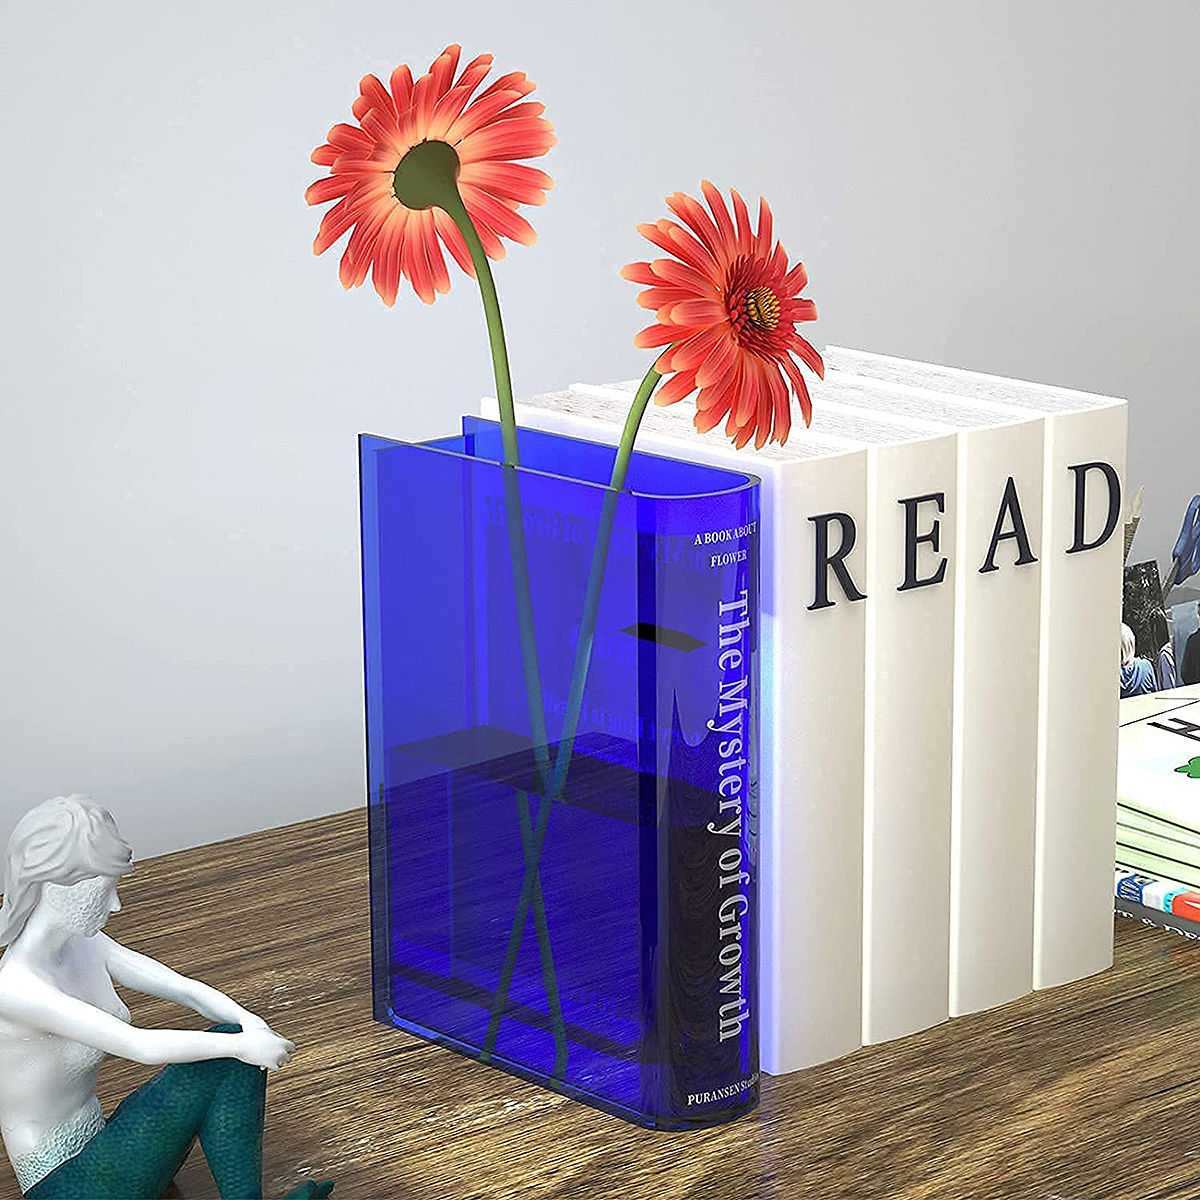 https://www.usmagazine.com/wp-content/uploads/2023/04/mothers-day-gift-guide-2023-amazon-book-flower-vase.jpg?quality=86&strip=all